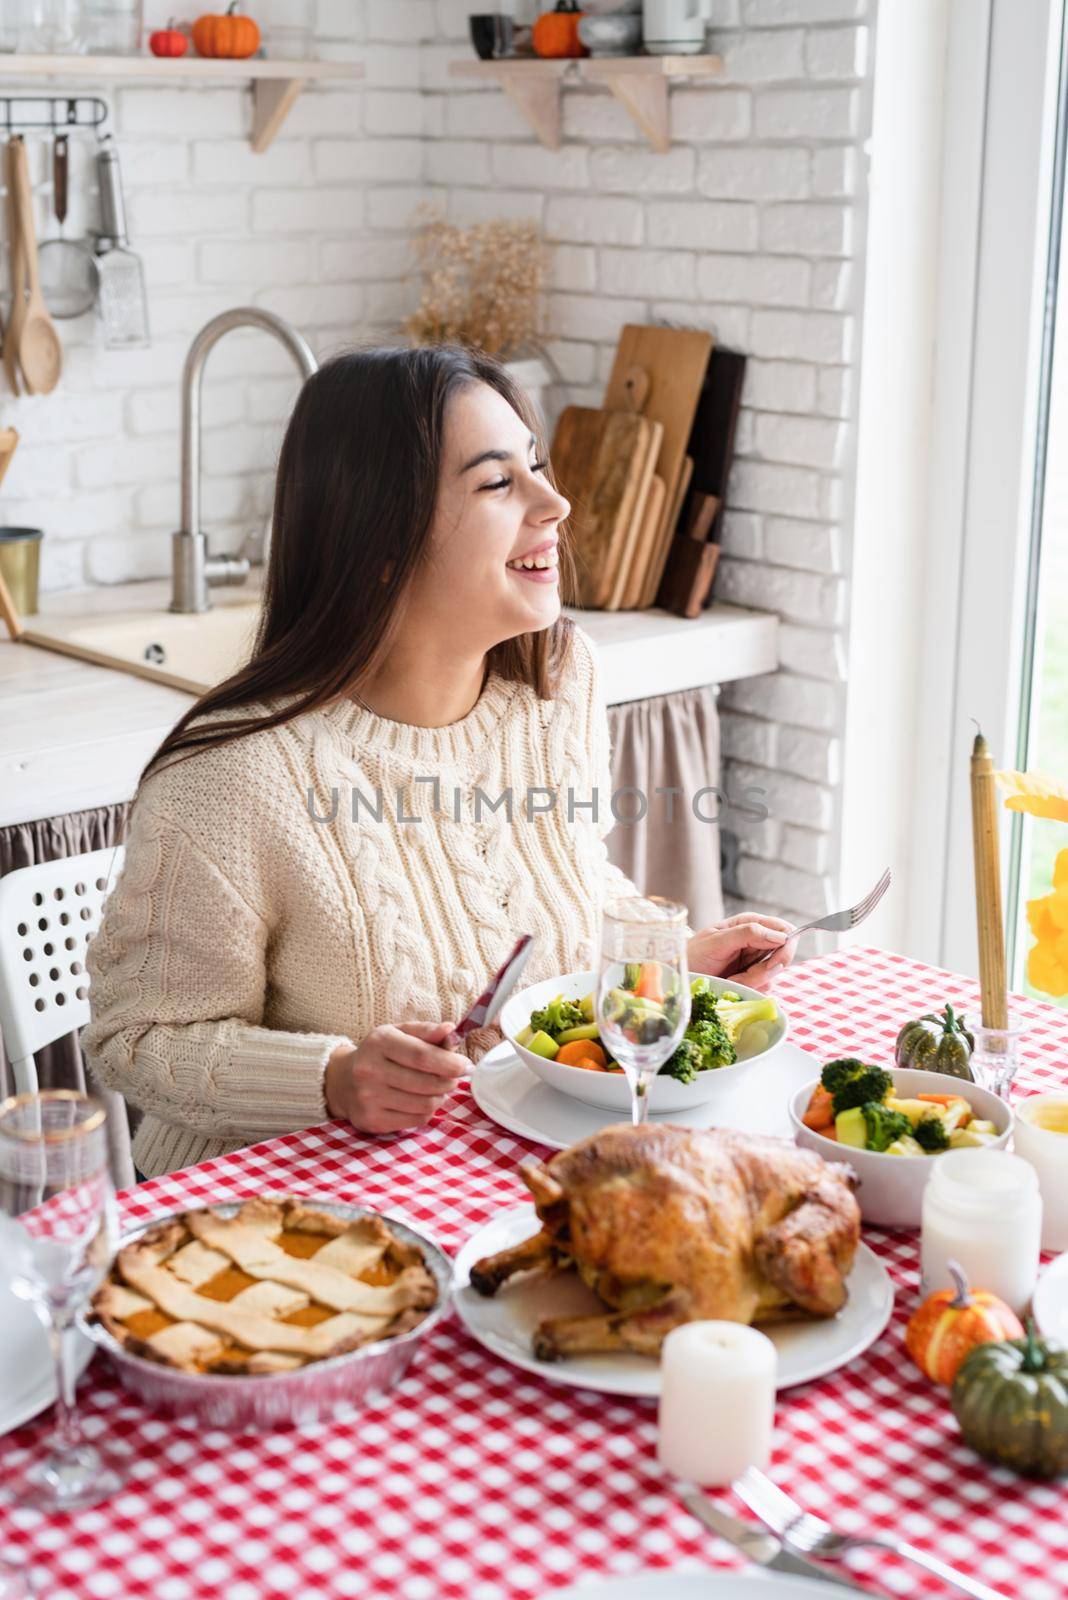 Happy Thanksgiving Day. Autumn feast. Woman celebrating holiday eating traditional dinner at kitchen